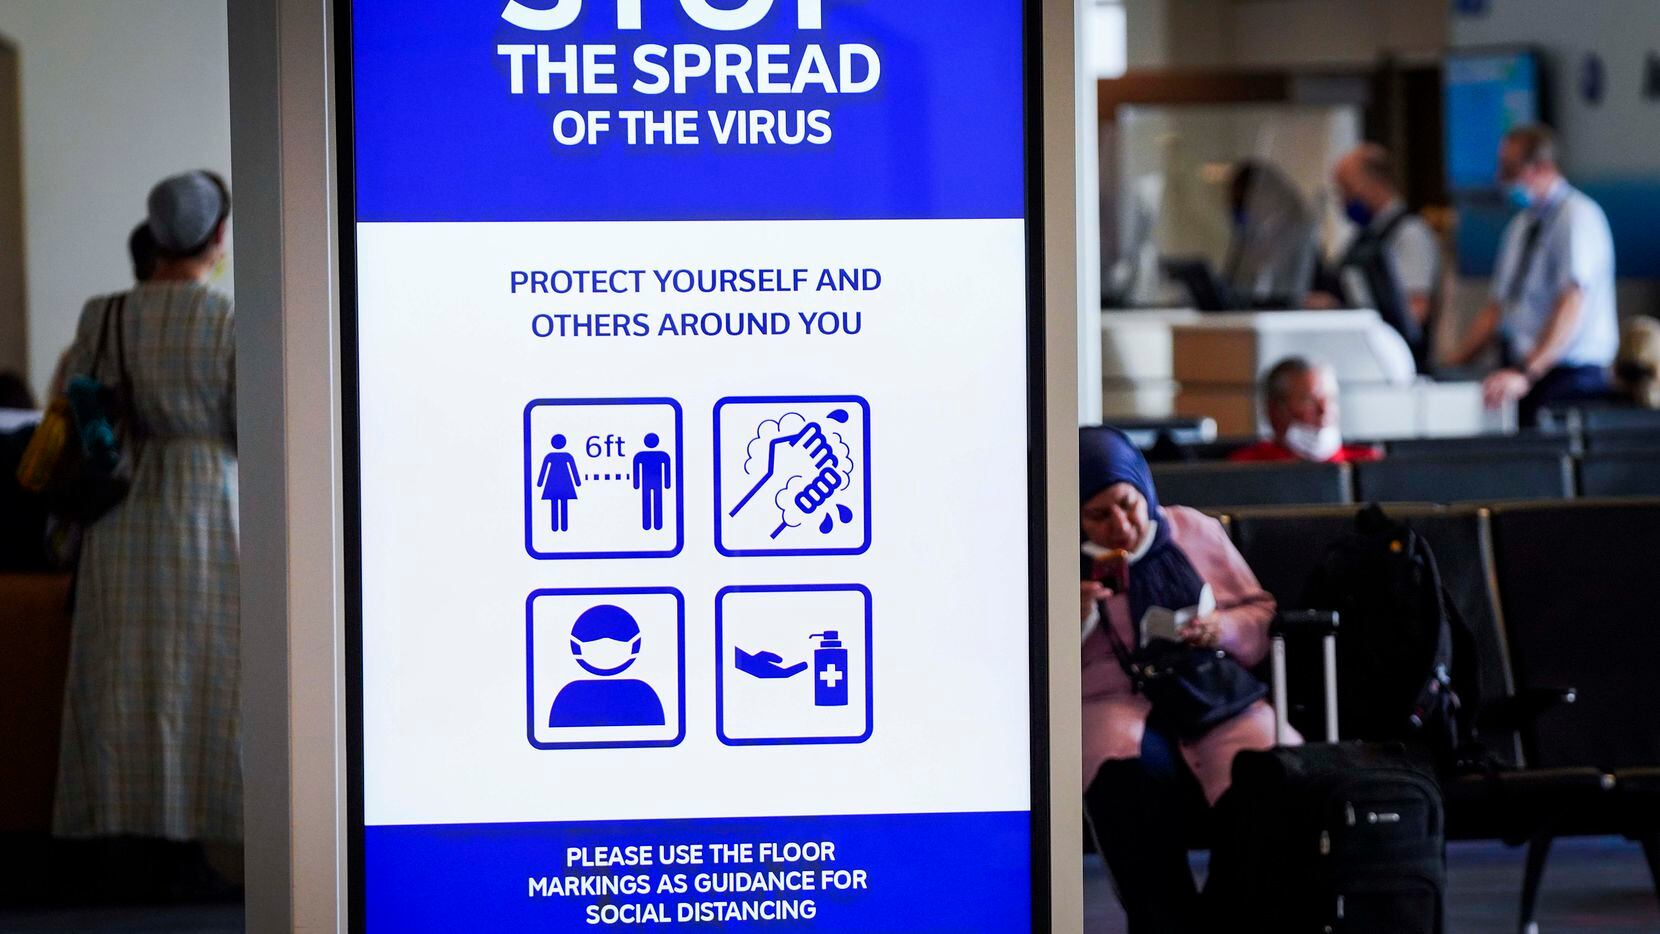 A message board displayed a public health notice of precautions against the spread of COVID-19 as passengers waited to board an American Airlines flight at DFW International Airport Terminal A on June 30, 2020.